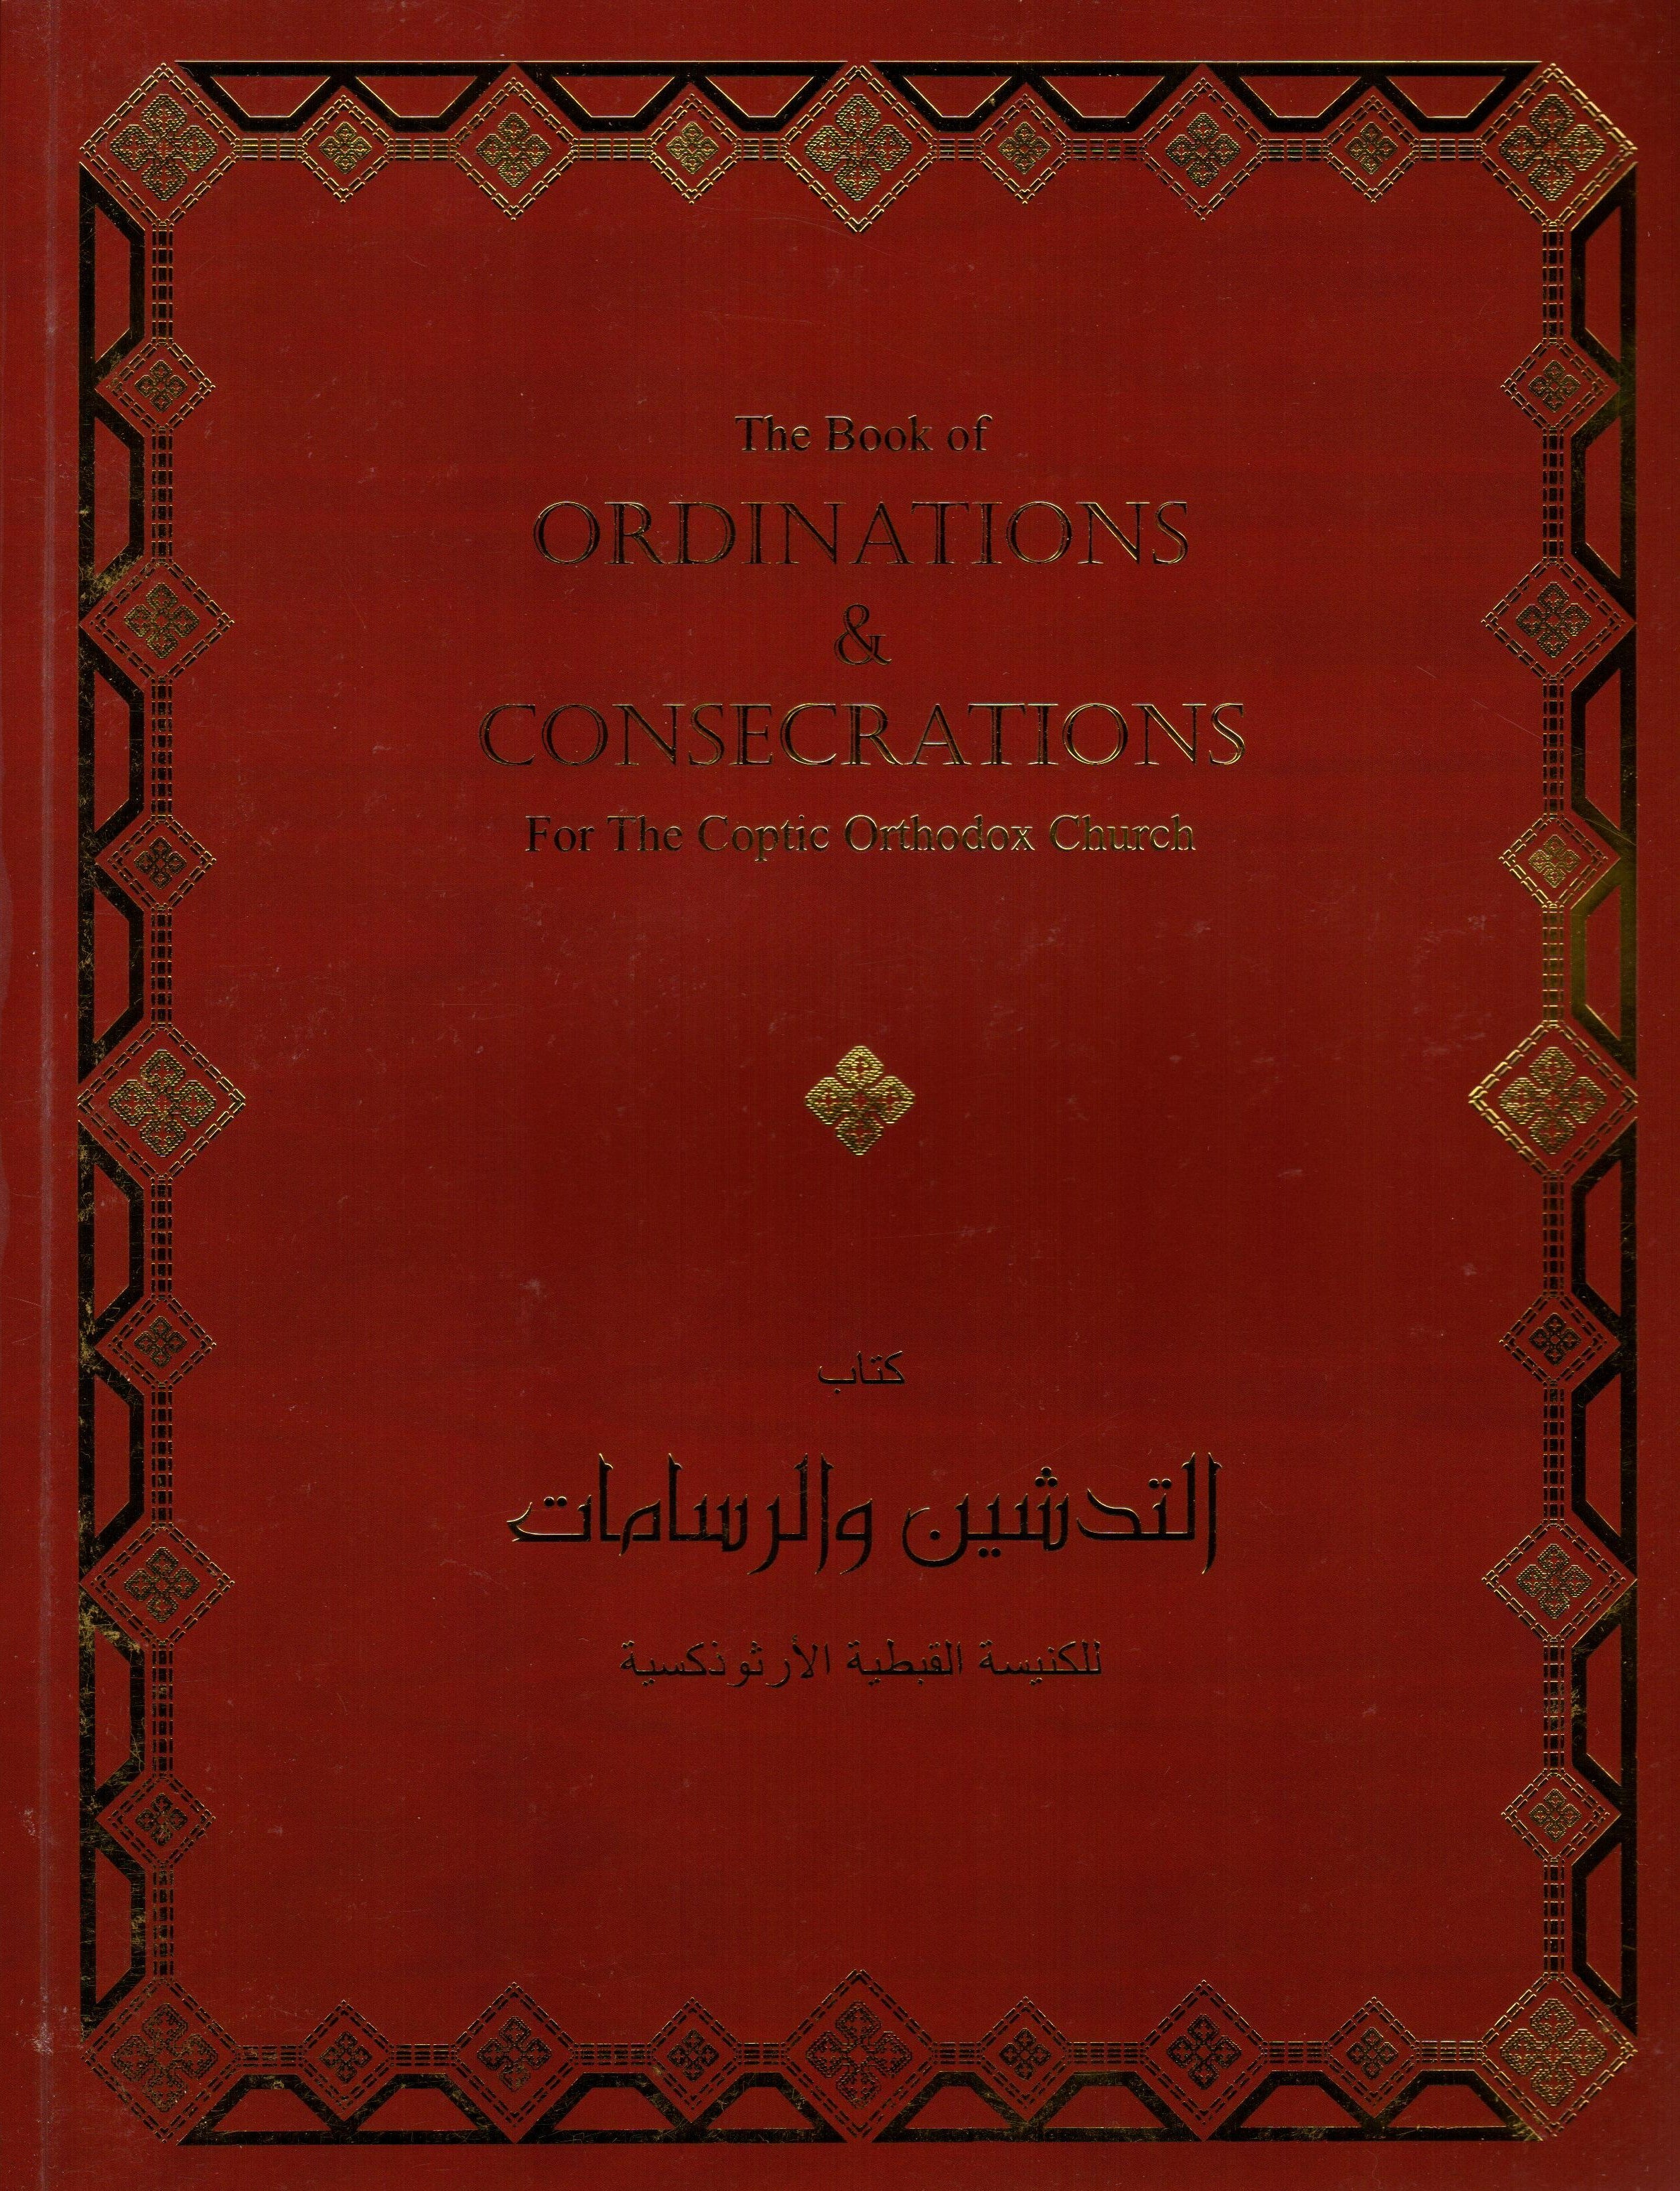 The Book of Ordinations and Consecrations